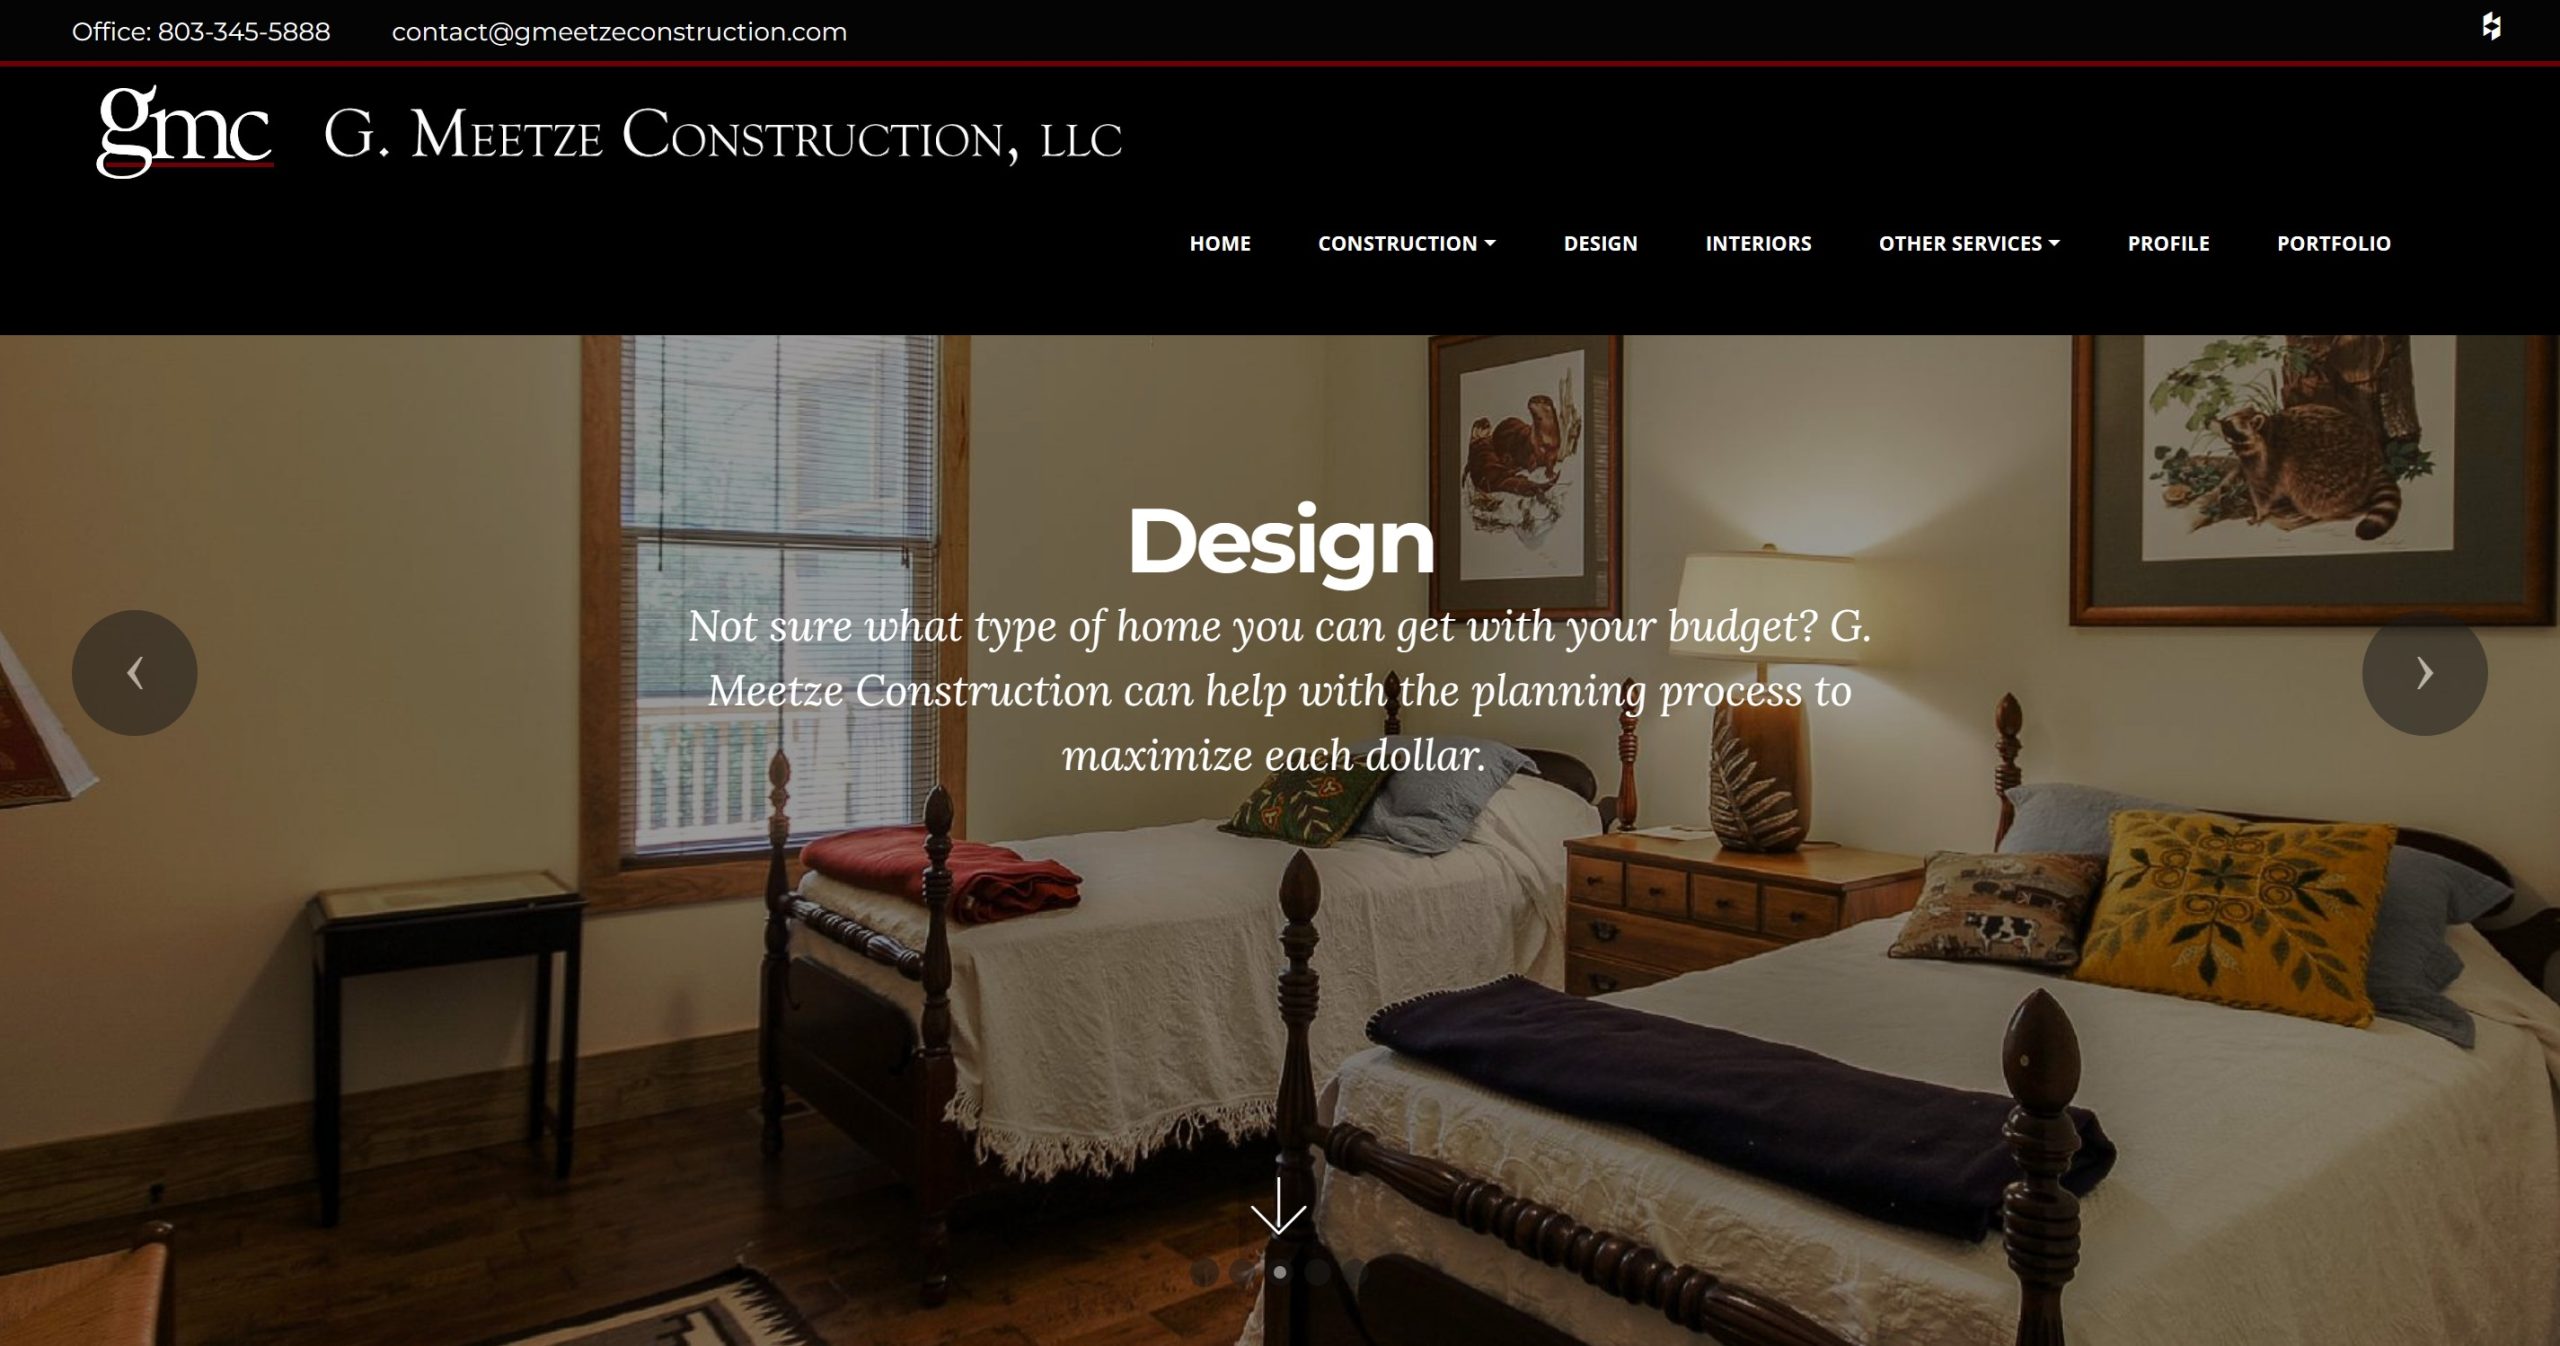 Top 3 Trusted Builders in Irmo, SC | Quality Construction Services